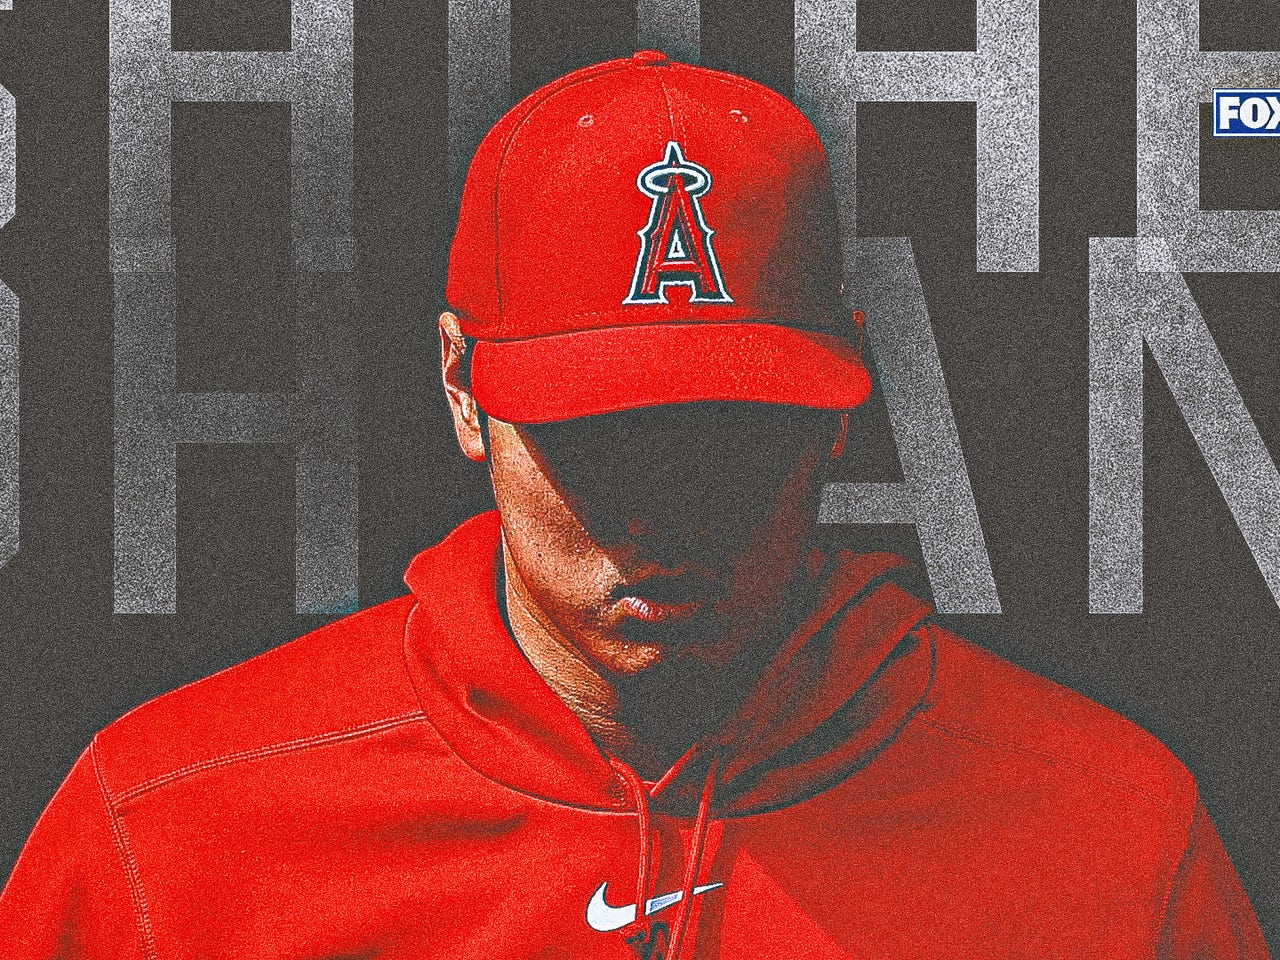 Please Let Shohei Ohtani Play for a Team That Doesn't Suck